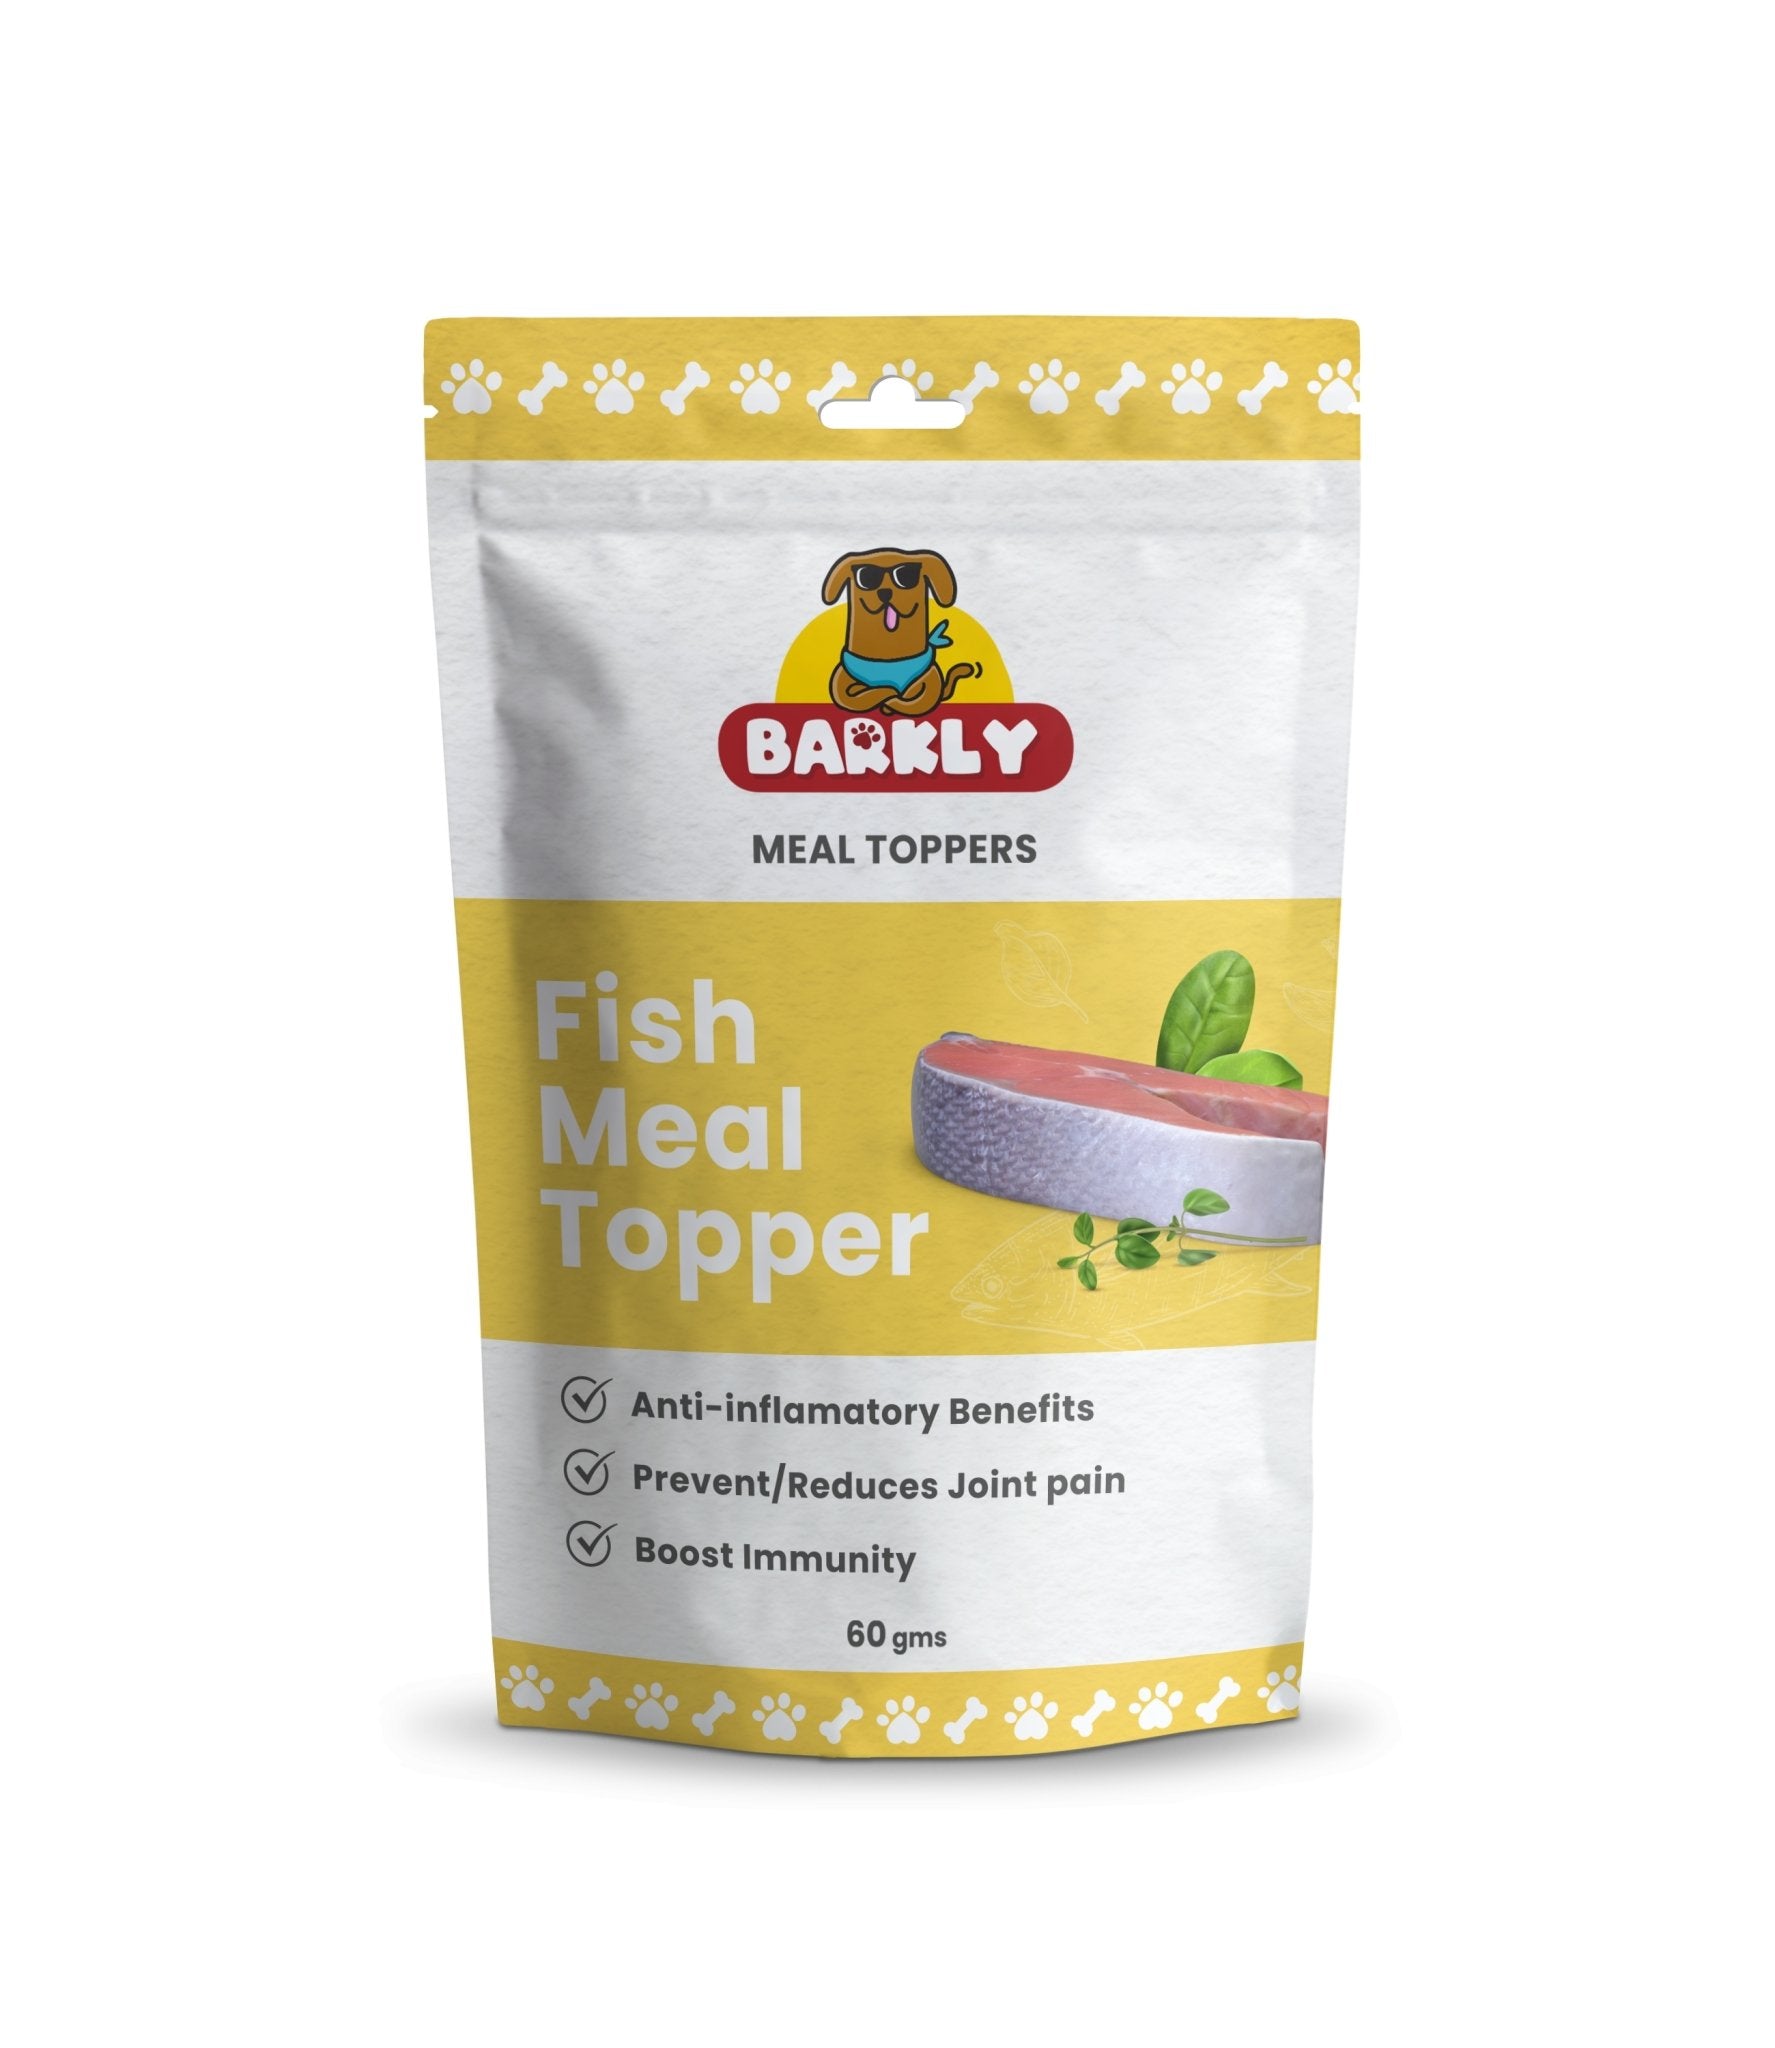 Fish Meal Topper - BARKLY